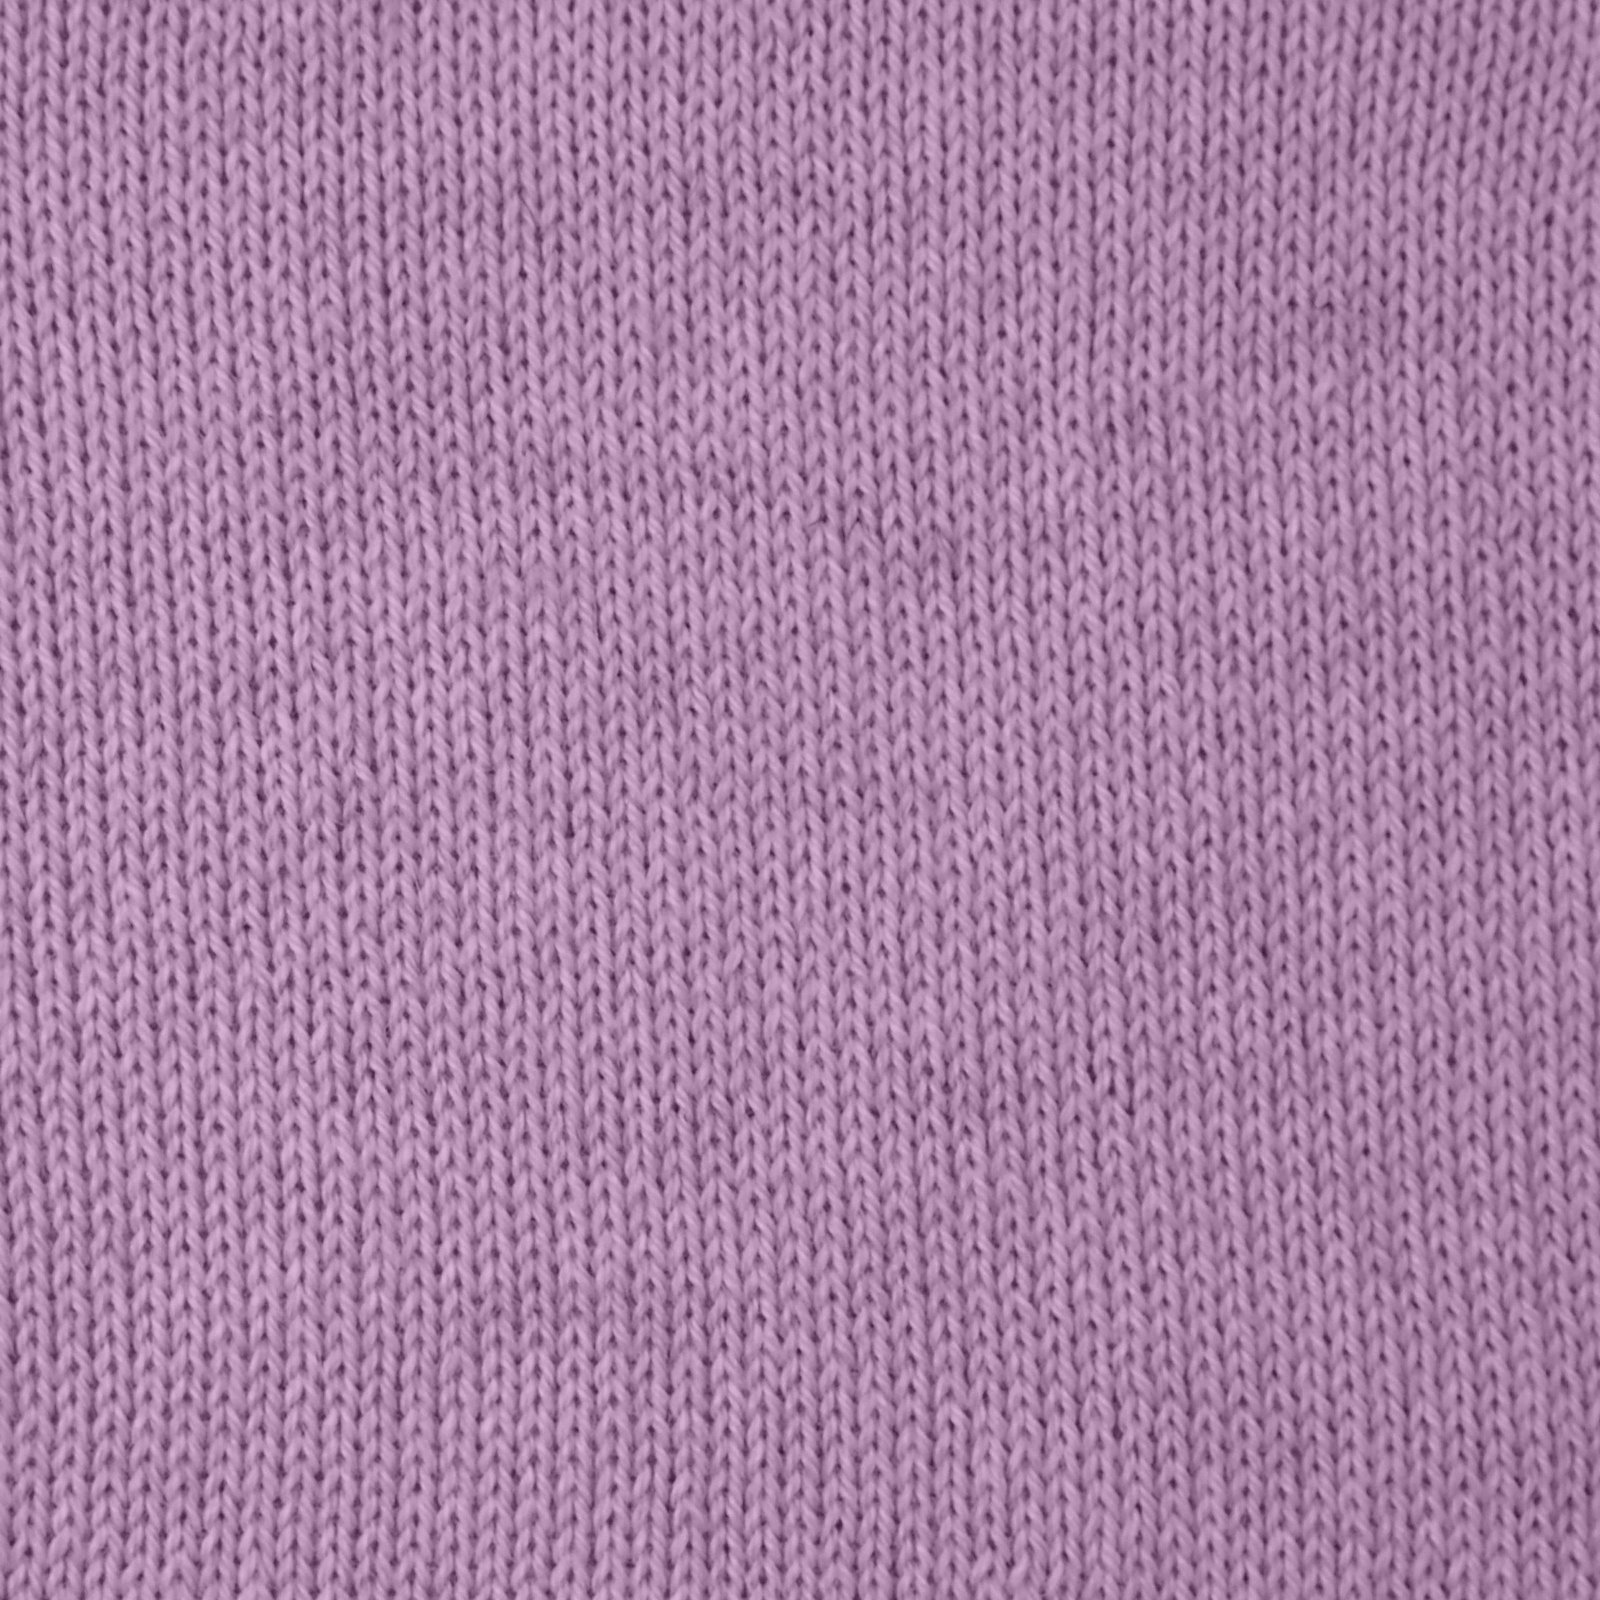 Woolly 50g lilac 90000072_sskit